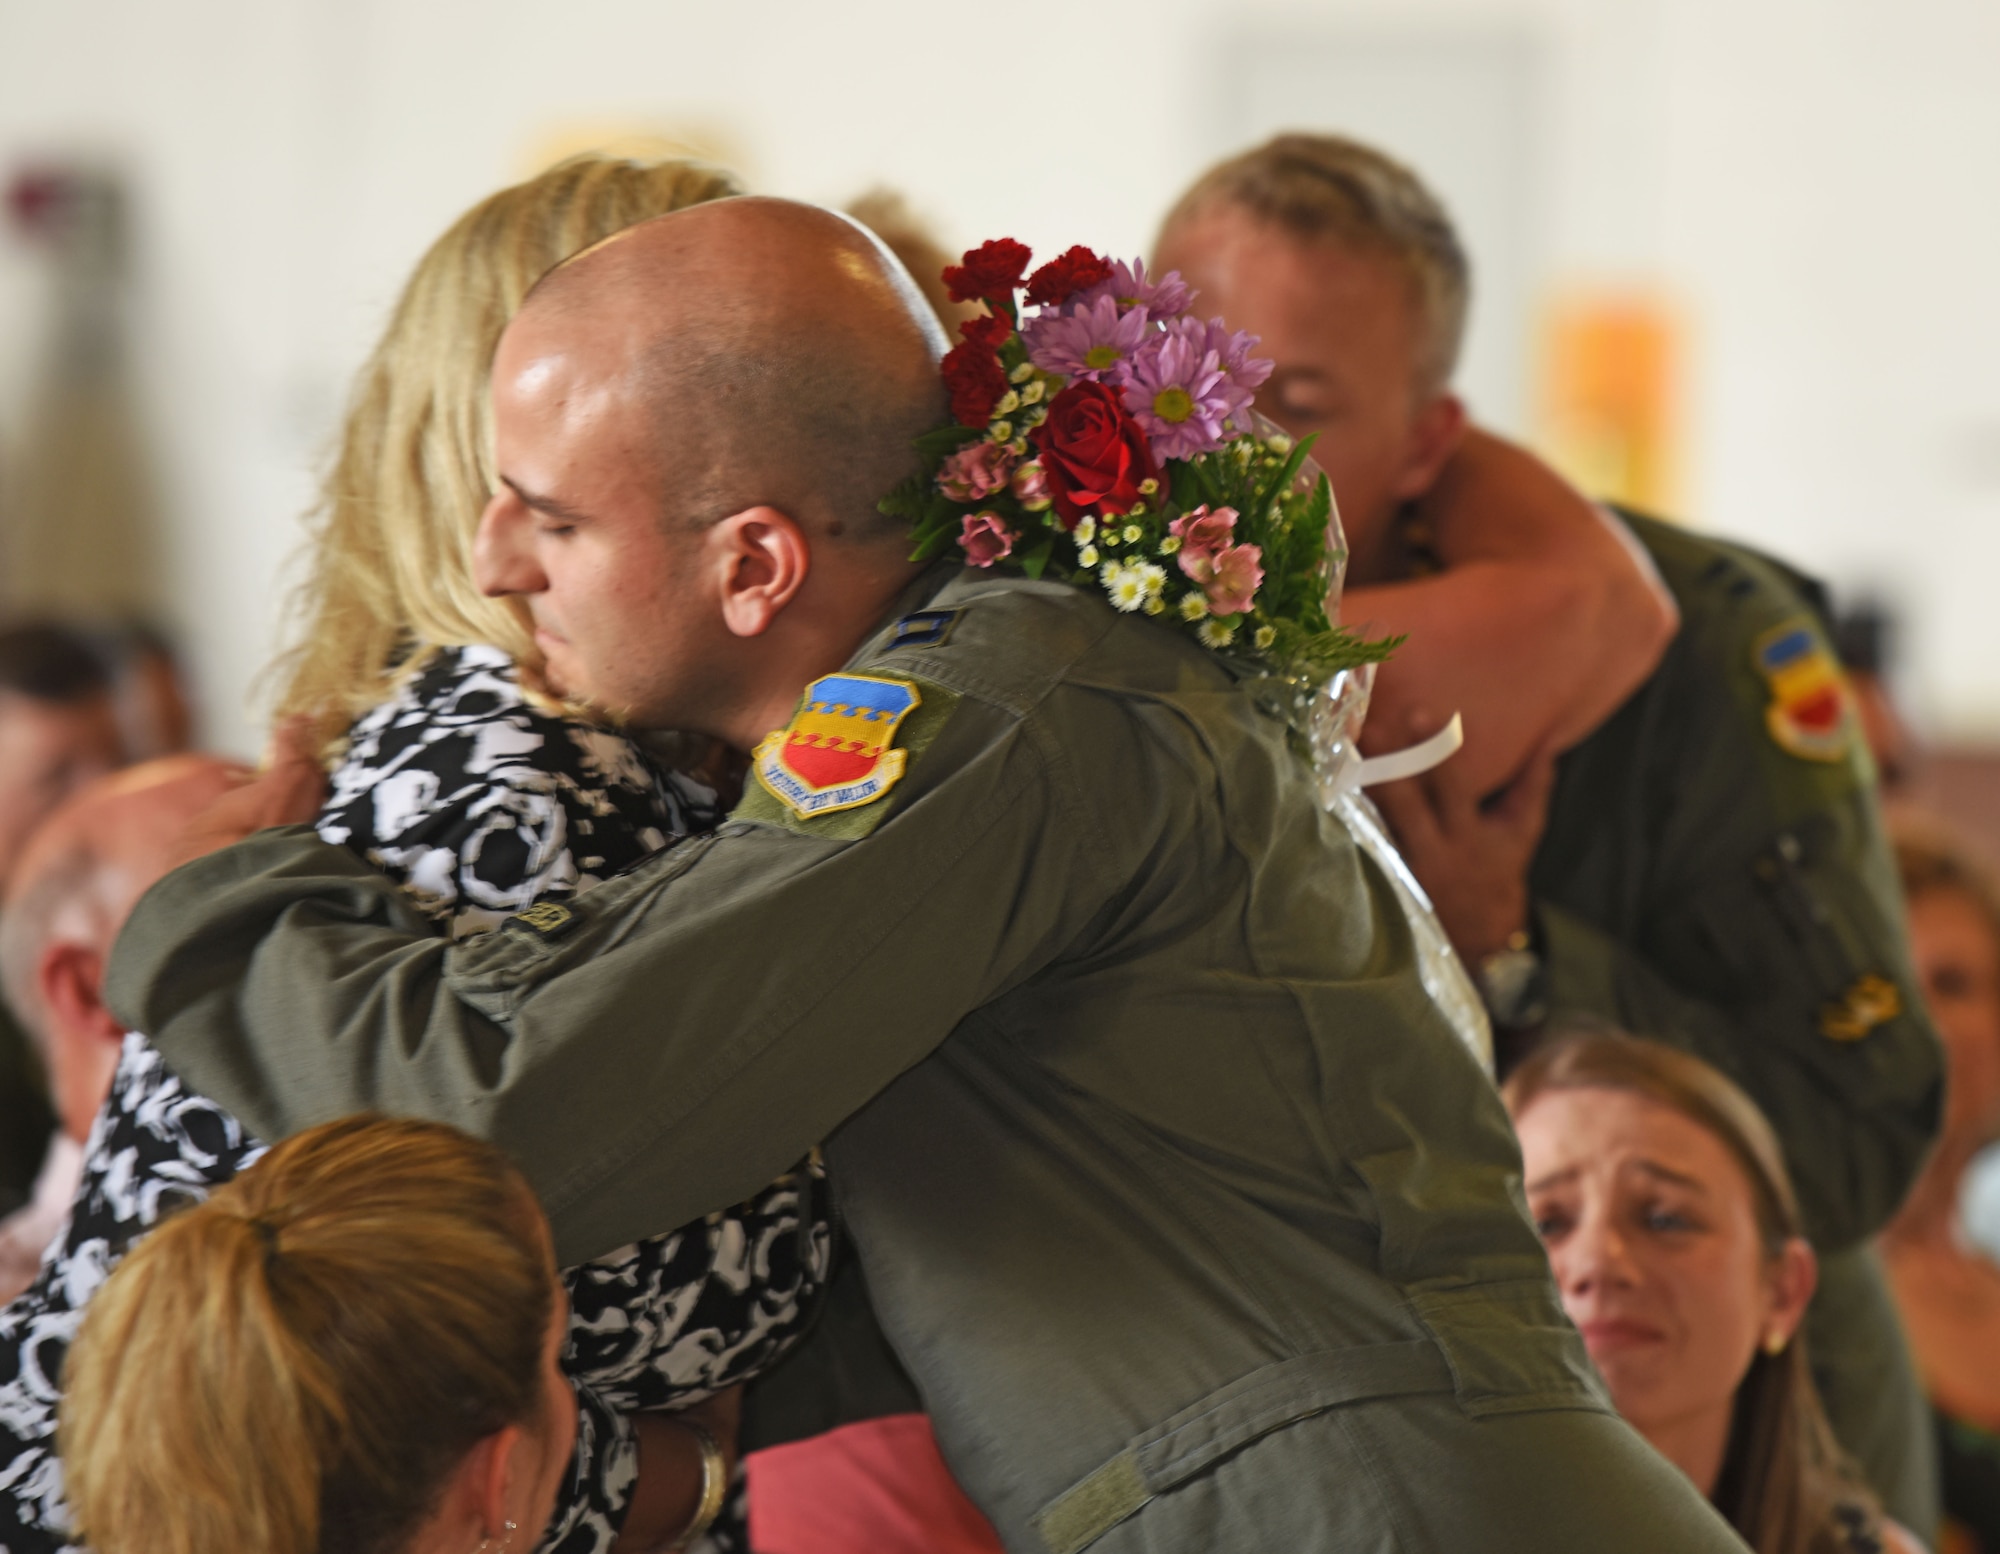 U.S. Air Force Captains John Nygard and Salvador Cruz, 79th Fighter Squadron instructor pilots, present flowers to friends and family members during a Distinguished Flying Cross presentation (DFC) ceremony at Shaw Air Force Base, S.C., June 7, 2018.